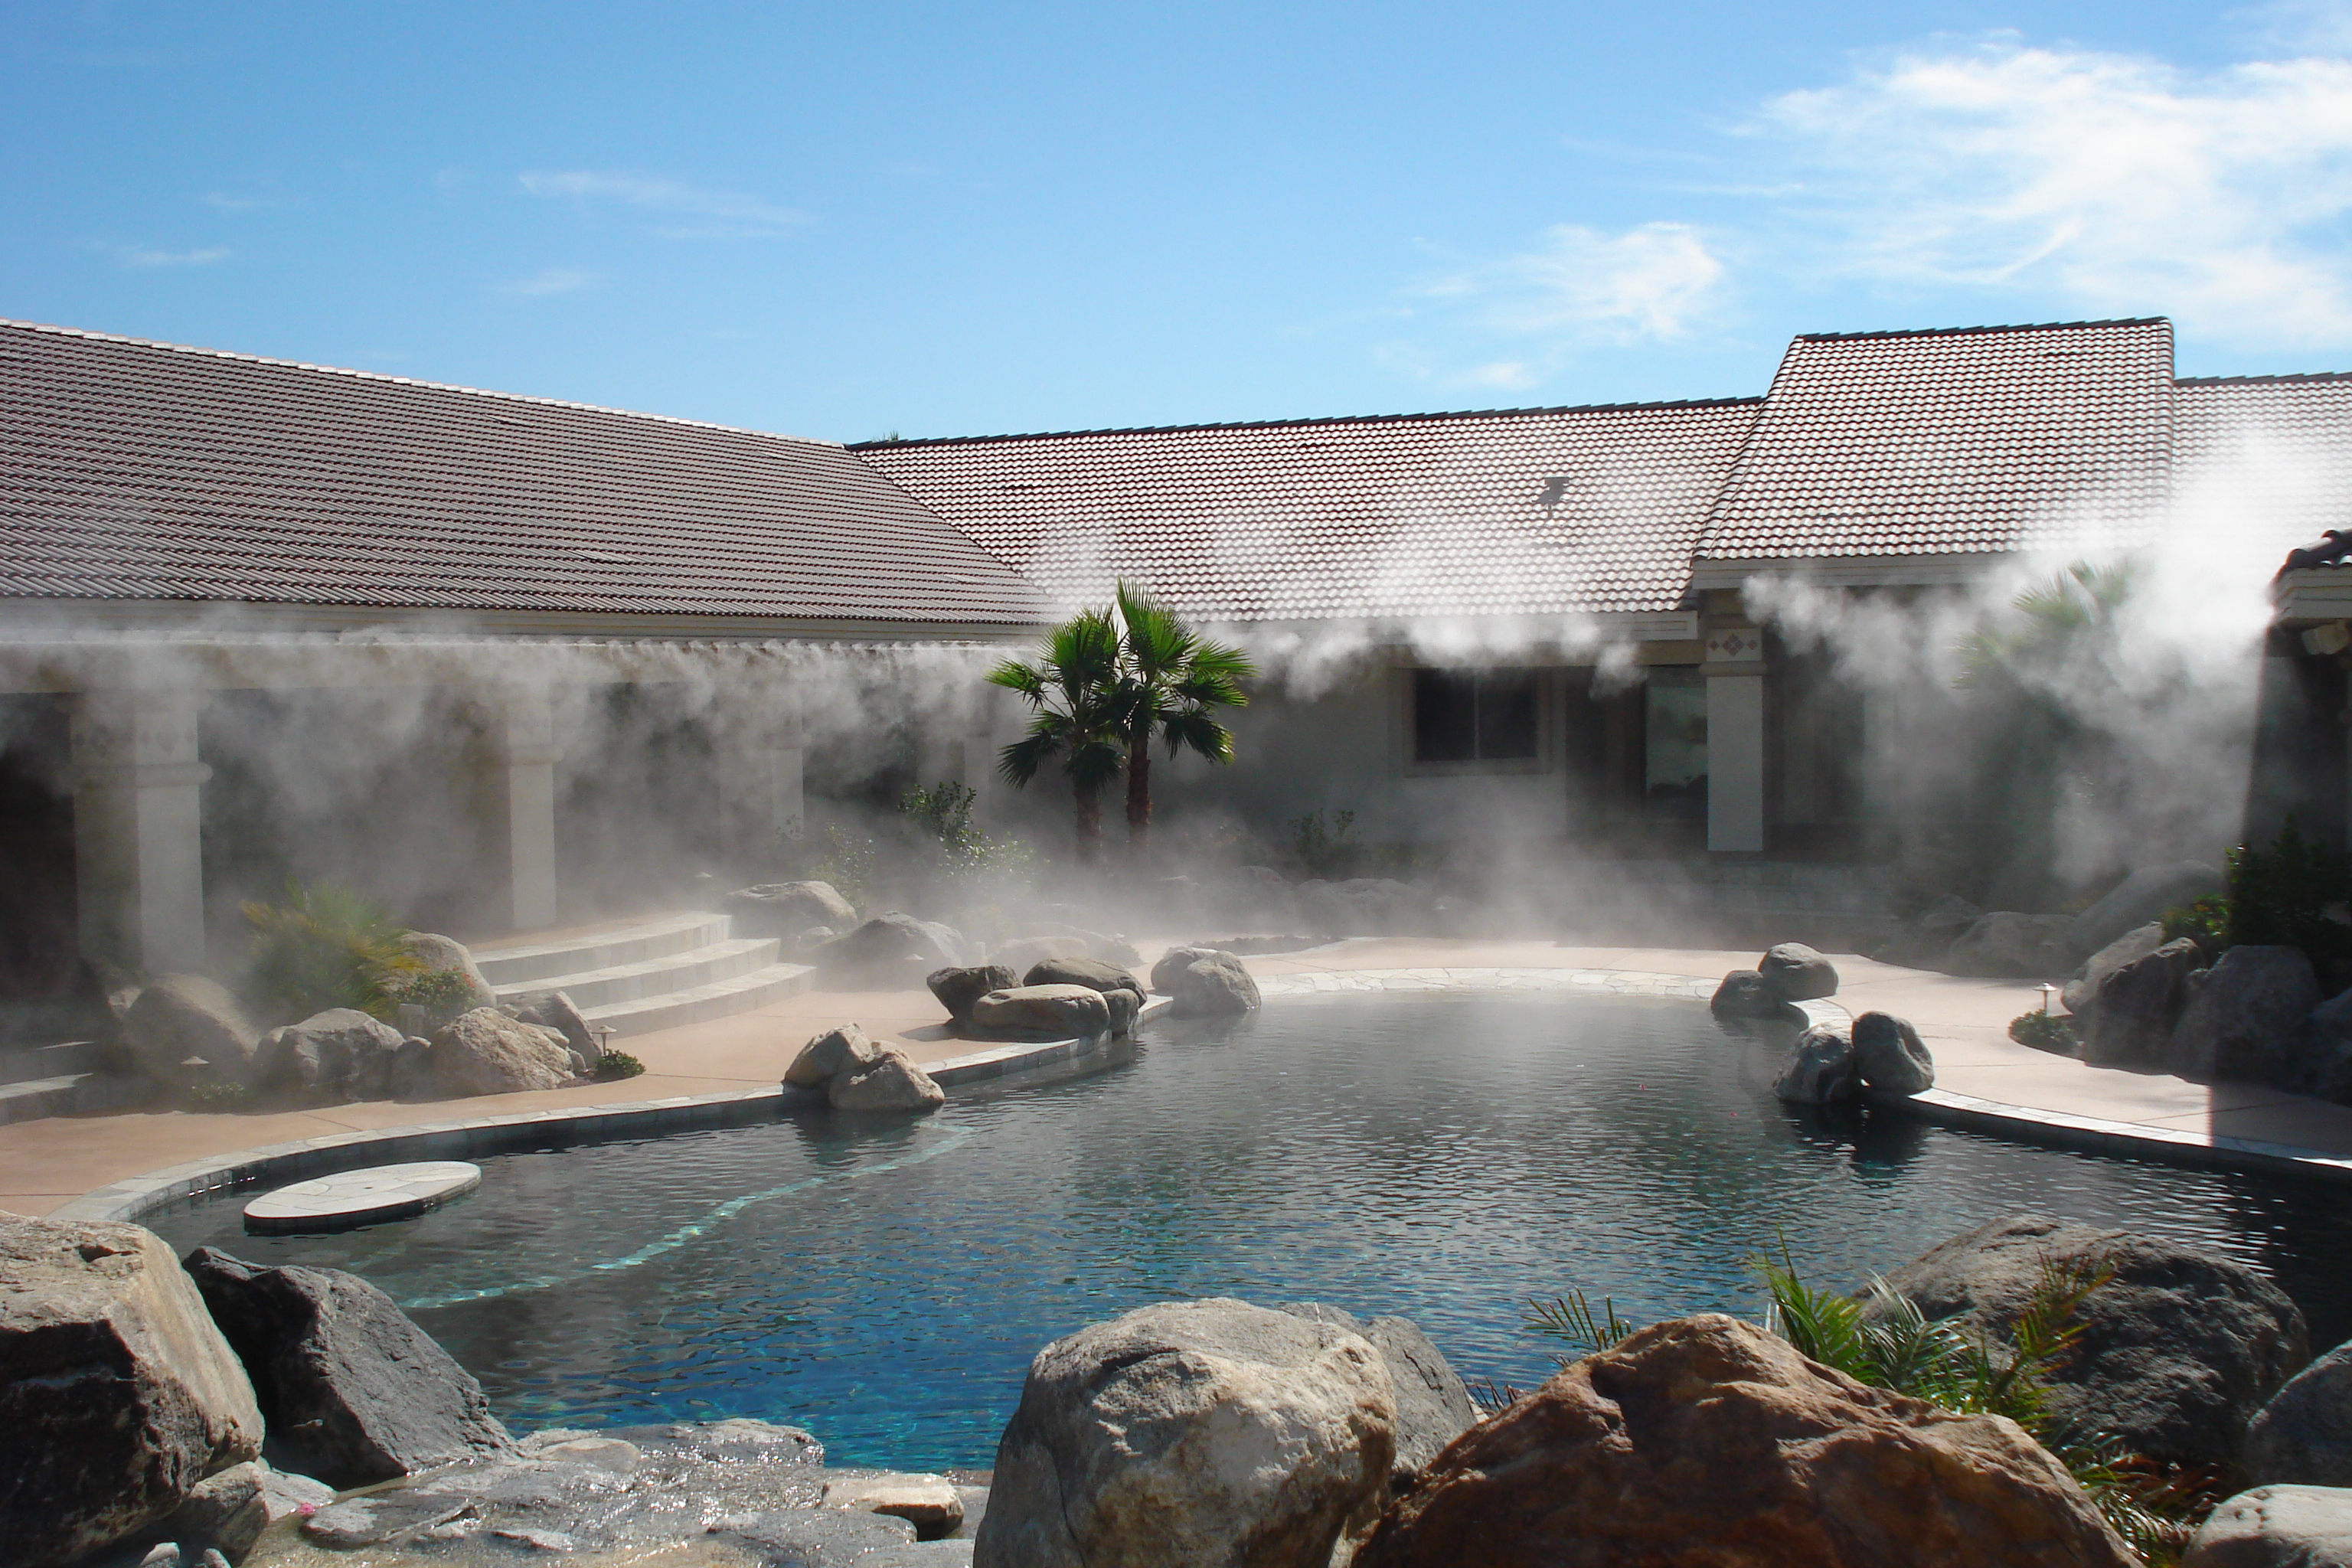 A Fogging or Cooling System Can Help You Make the Most of Your Private or Commercial Oasis